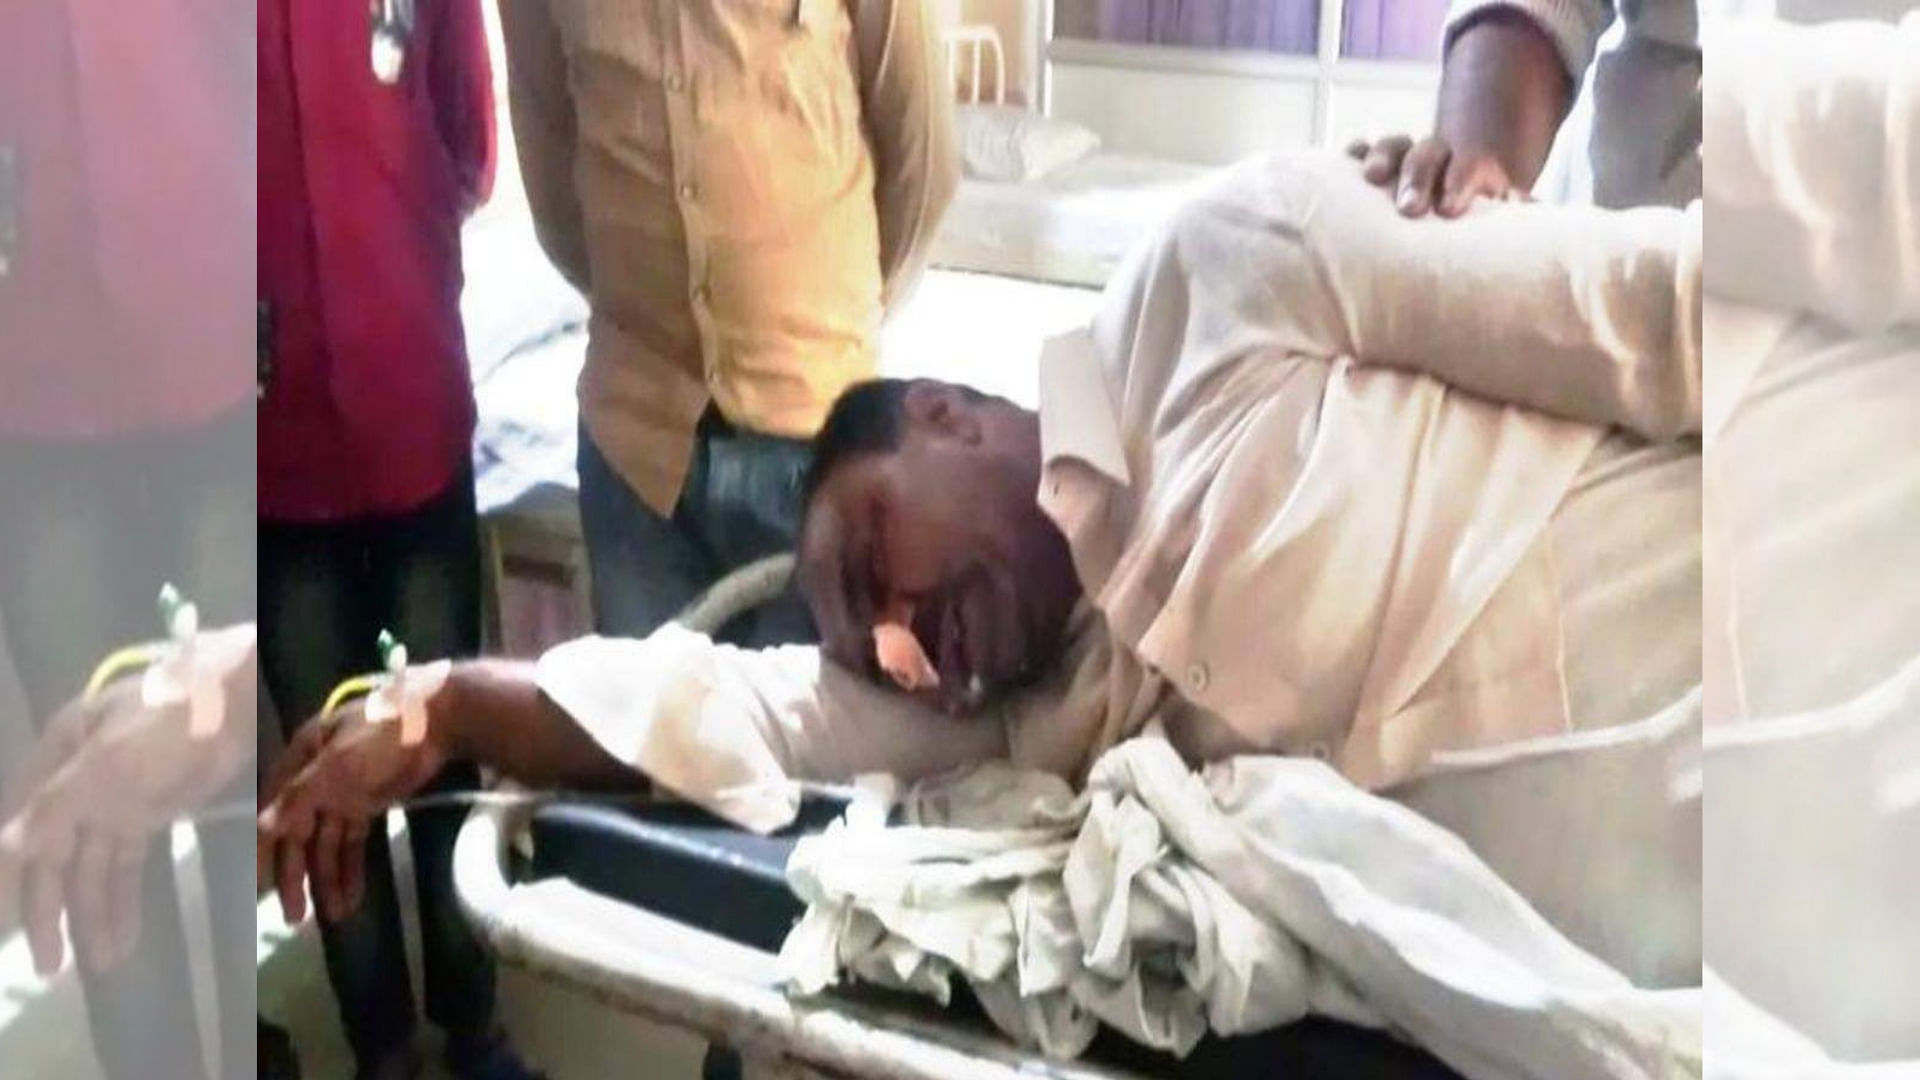 Awadh Narayan Sisodia, a resident of Behta village of Bhopal district who consumed poison after receiving inflated bill.&nbsp;